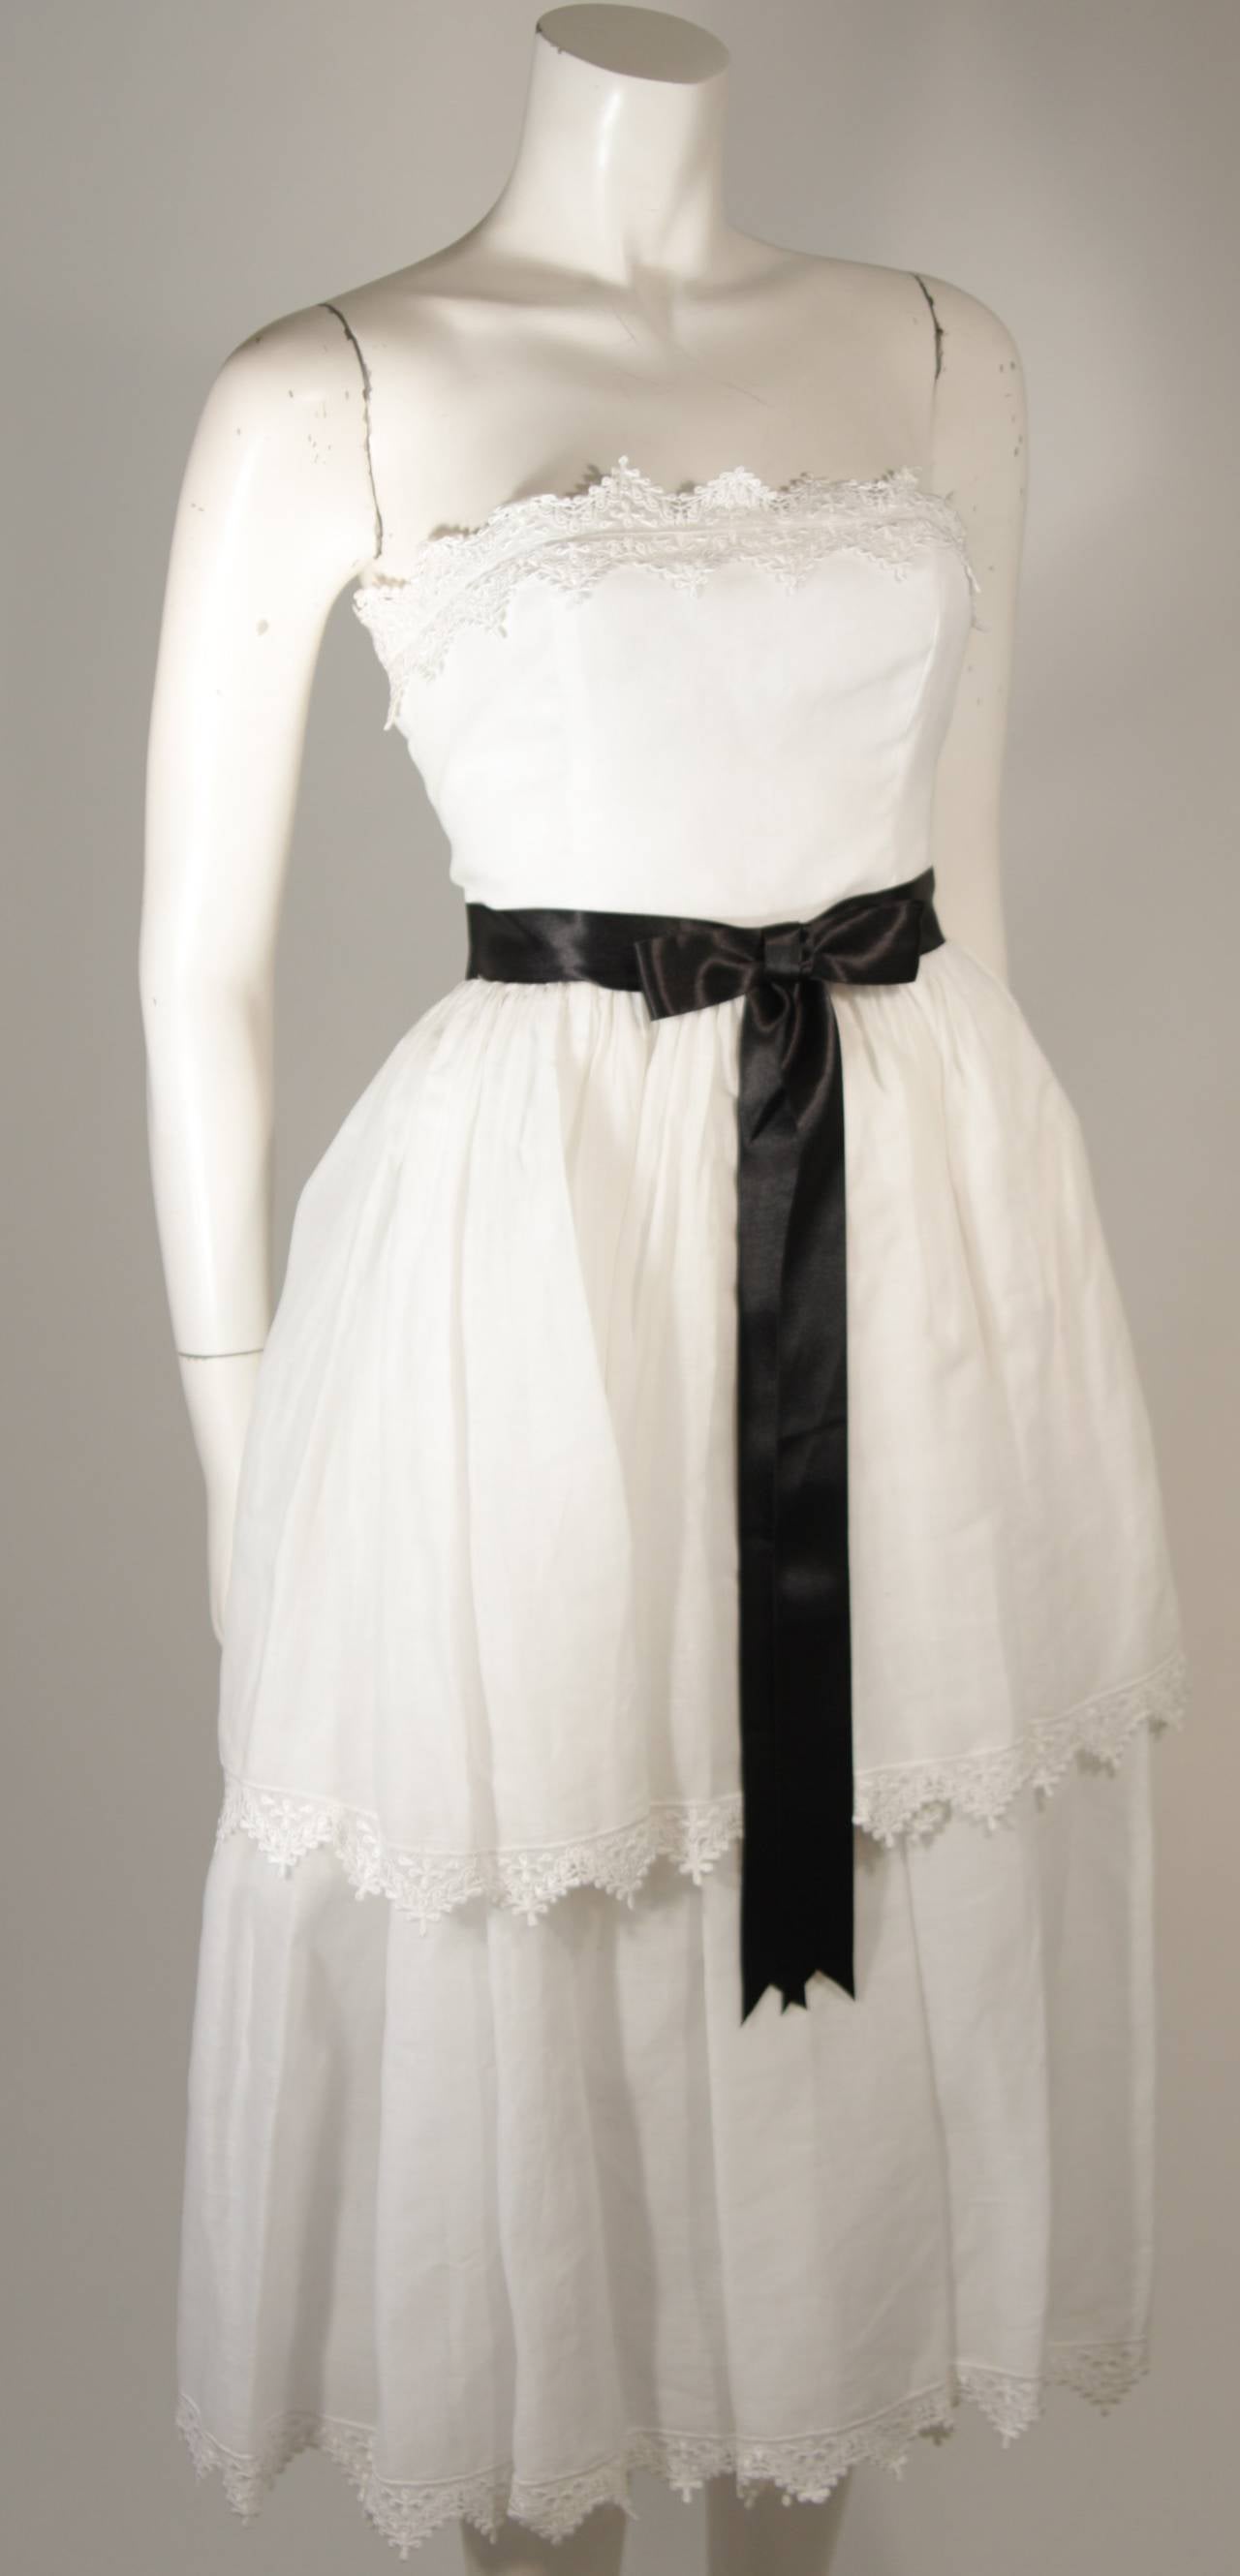 Gray Albert Capraro White Cotton Tiered Dress with Scalloped Lace Edges Size 6 For Sale